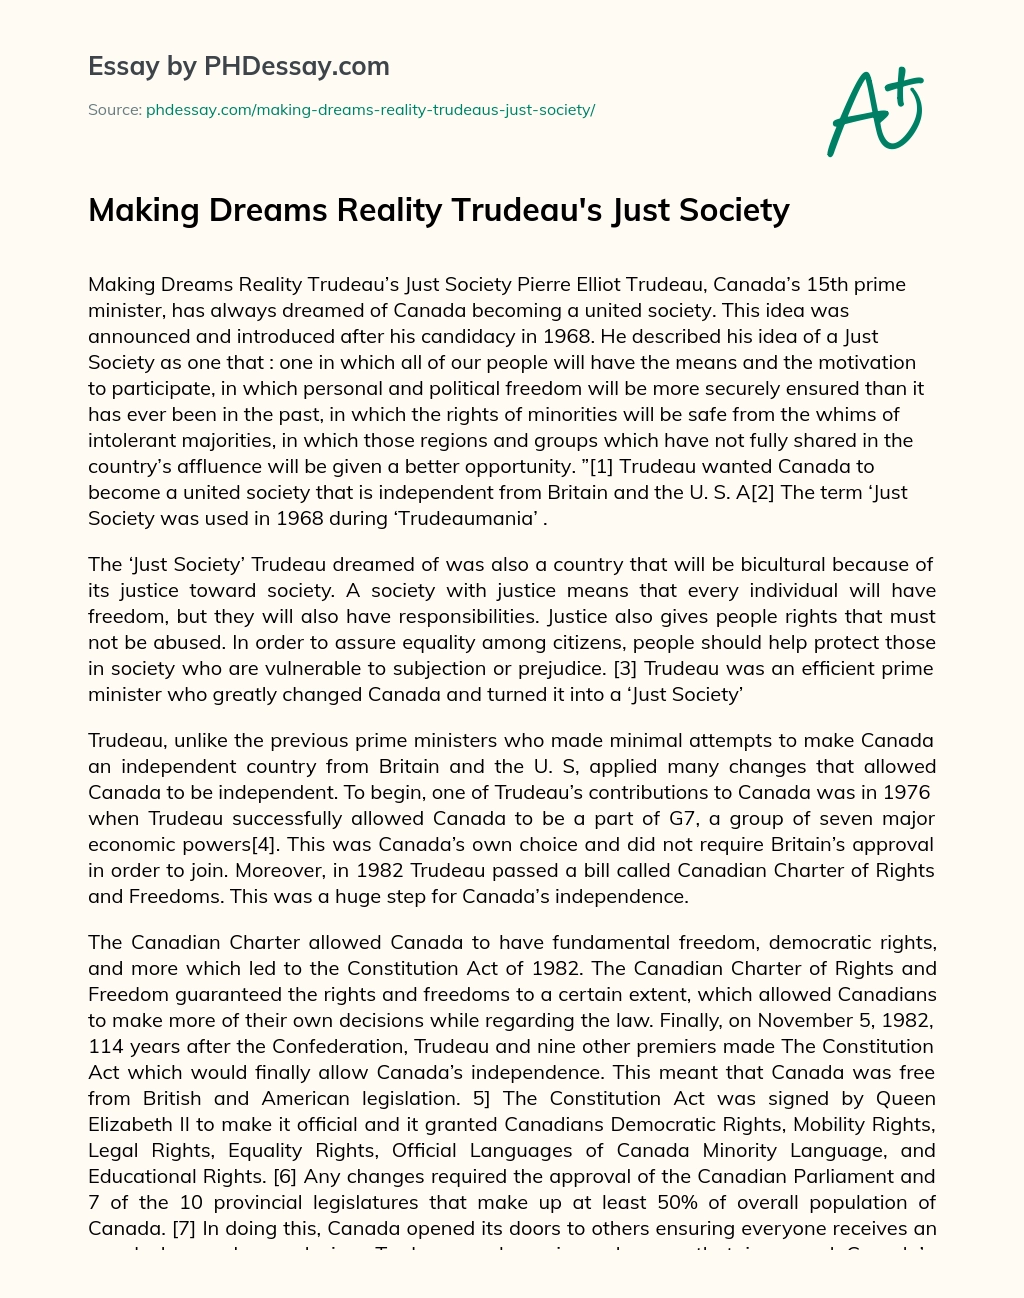 Making Dreams Reality Trudeau’s Just Society essay